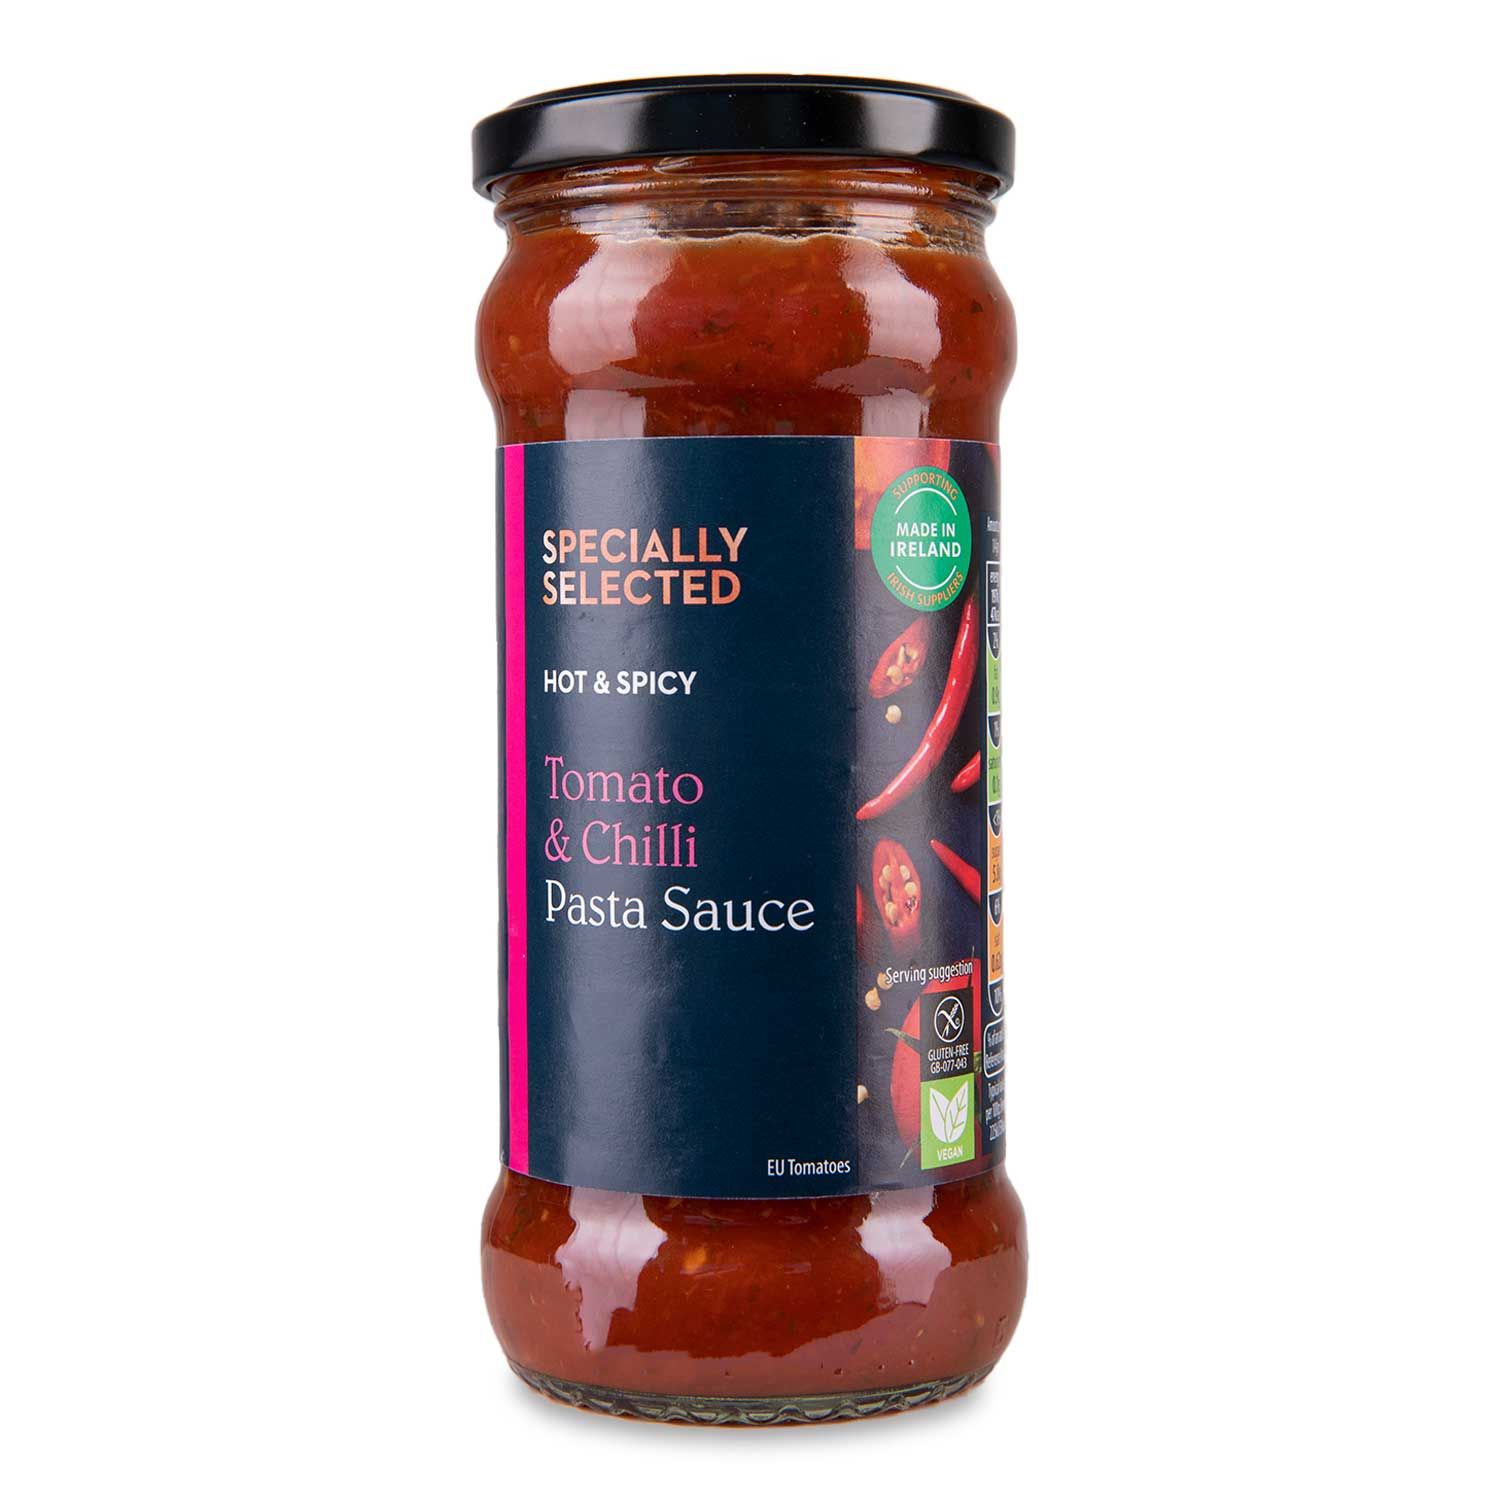 Tomato & Chilli Pasta Sauce 350g Specially Selected 